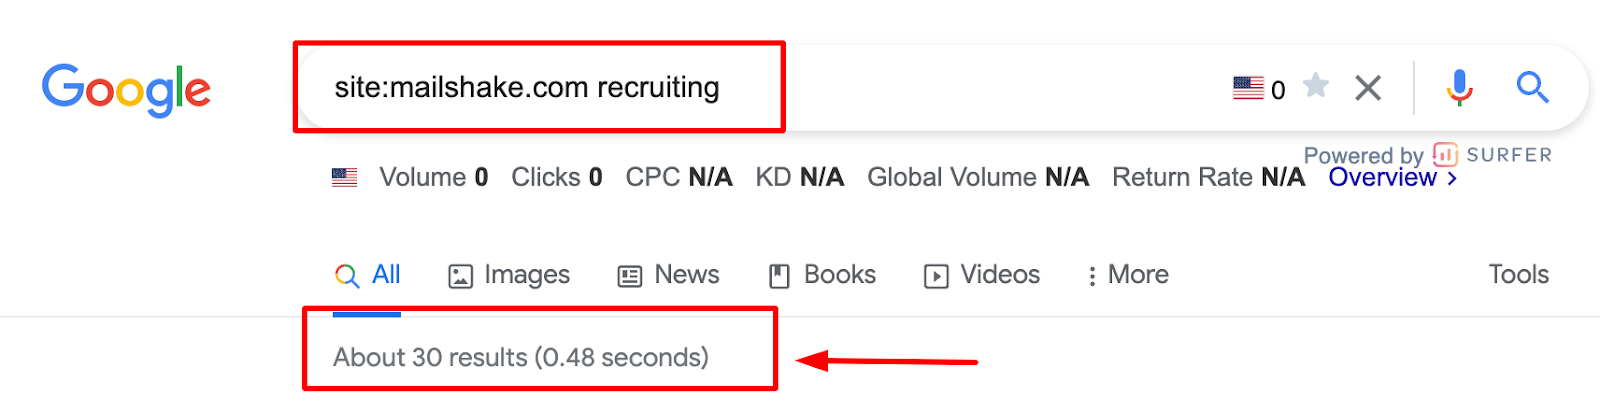 Mailshake.com indexed pages relevant to recruiting 